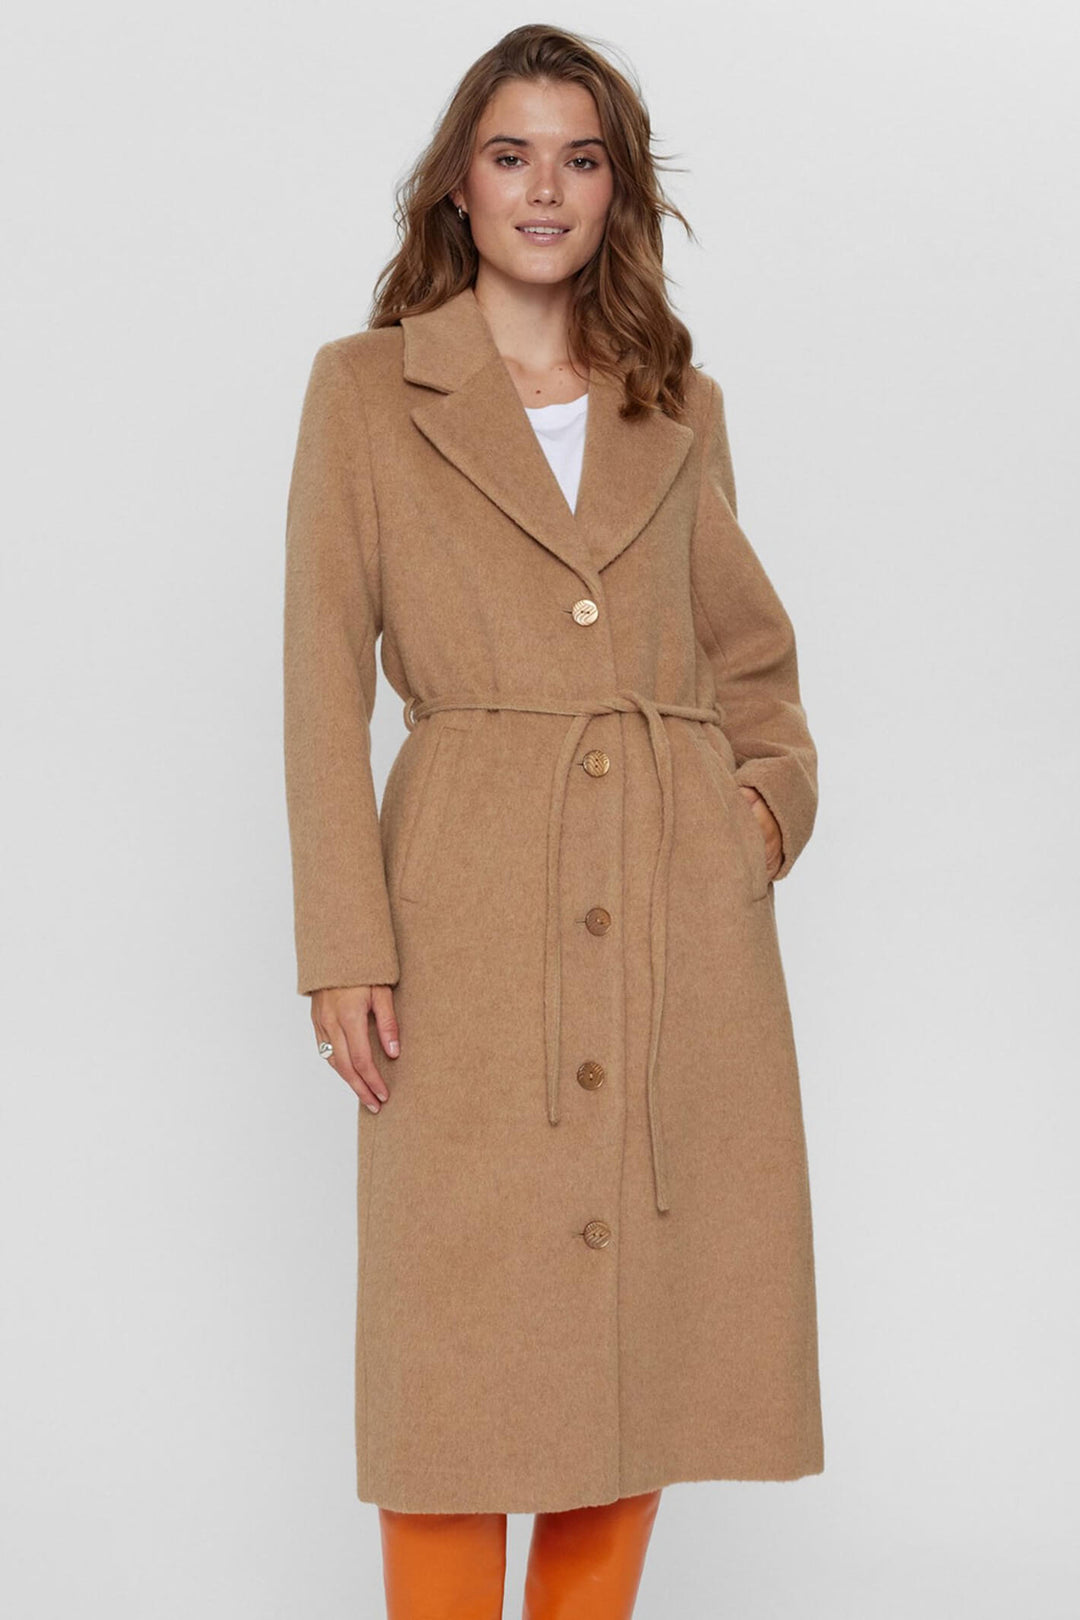 Numph Nugry 703369 Chipmunk Taupe Wool Mix Button Front Coat - Shirley Allum Boutique